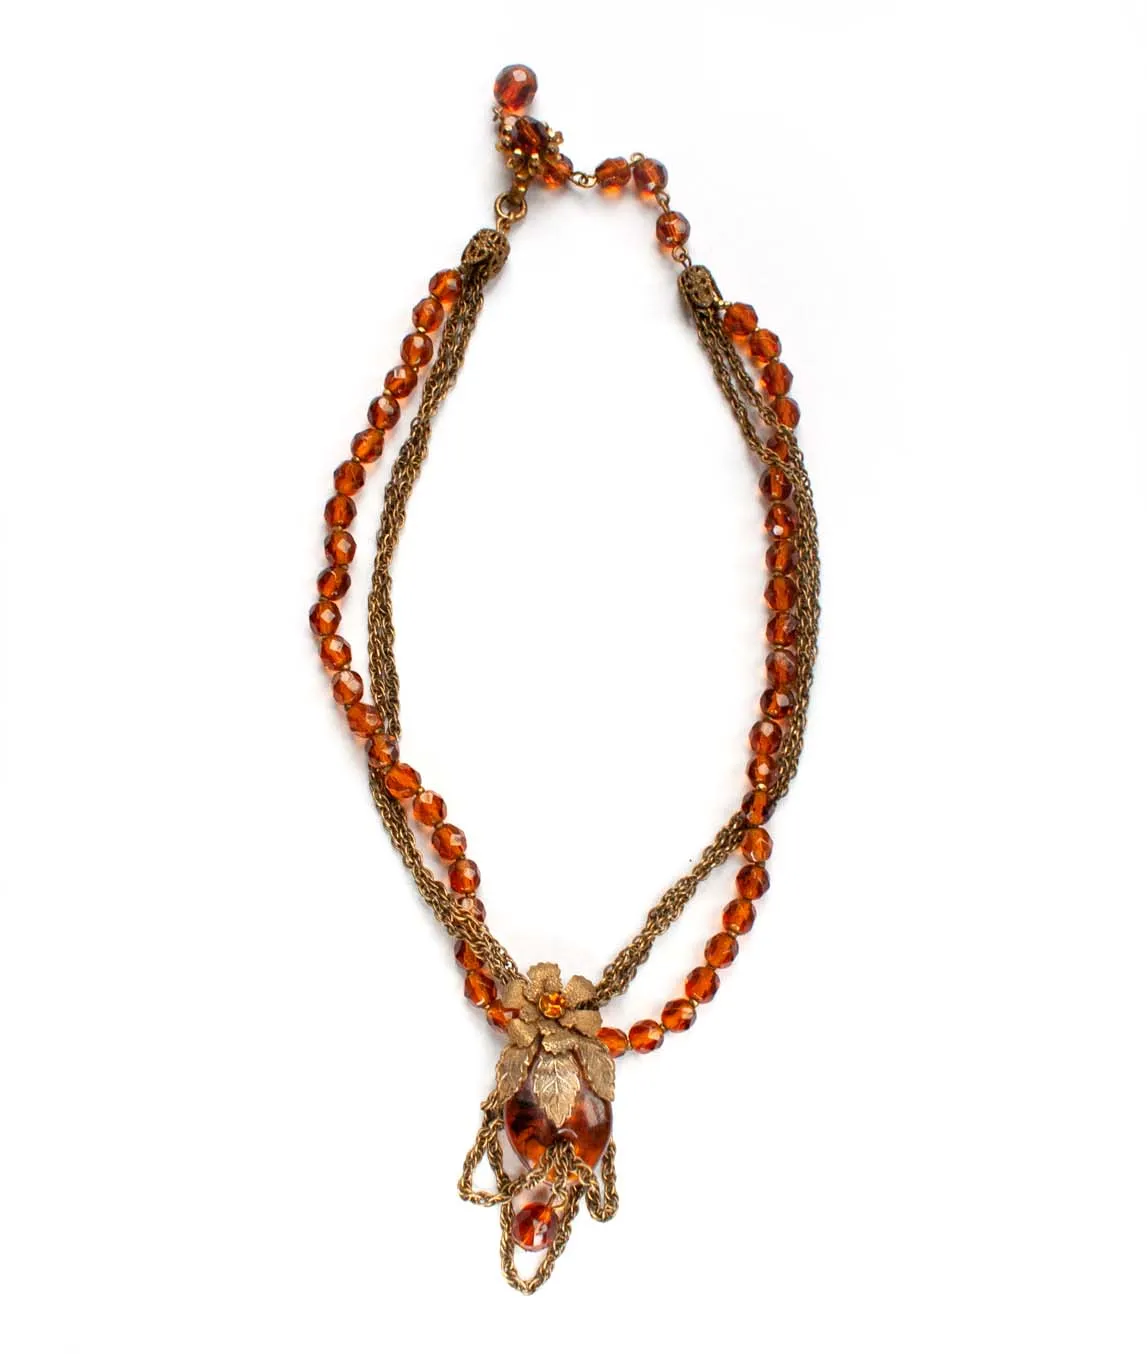 Miriam Haskell pineapple necklace with bronze beads and chains